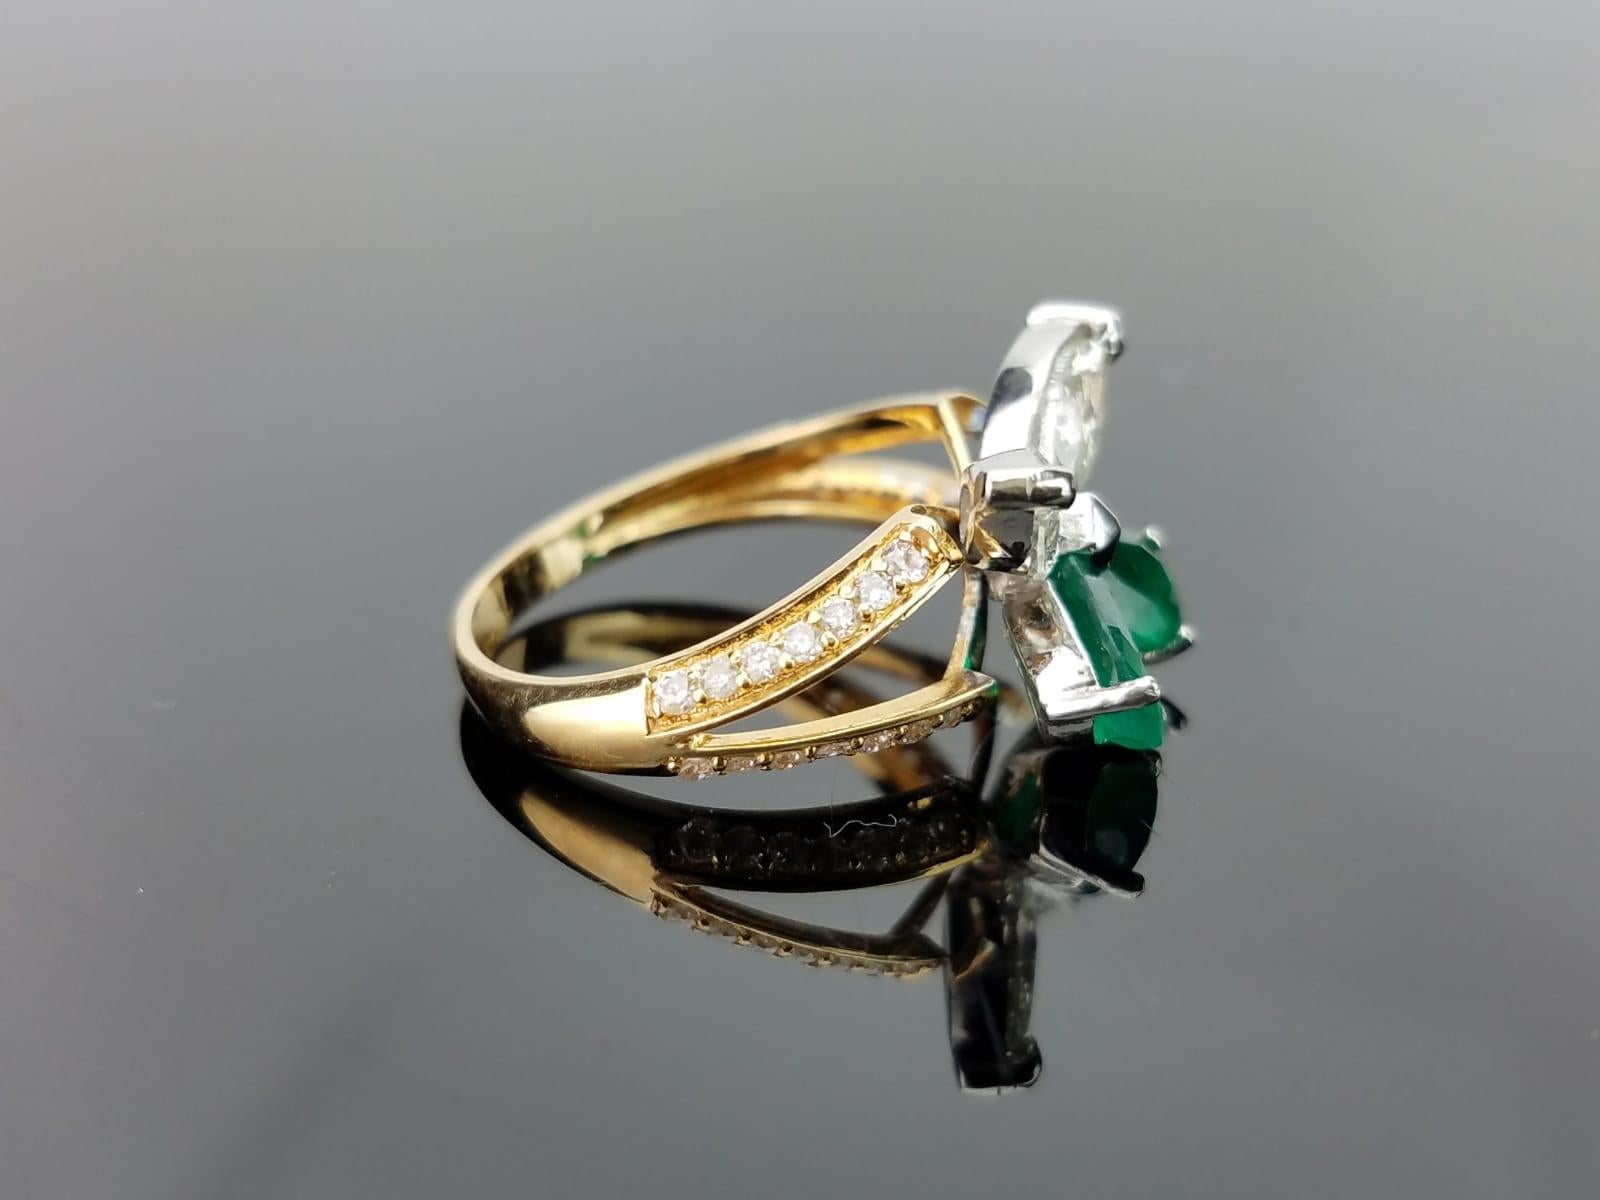 A delicate, and delightful ring with 2 Zambian Emerald marquise and 2 Diamond marquise - designed as a butterfly. All set in 18K yellow gold.

Stone Details: 
Stone: Zambian Emerald 
Carat Weight: 1.16 Carats

Diamond Details: 
Total Carat Weight: